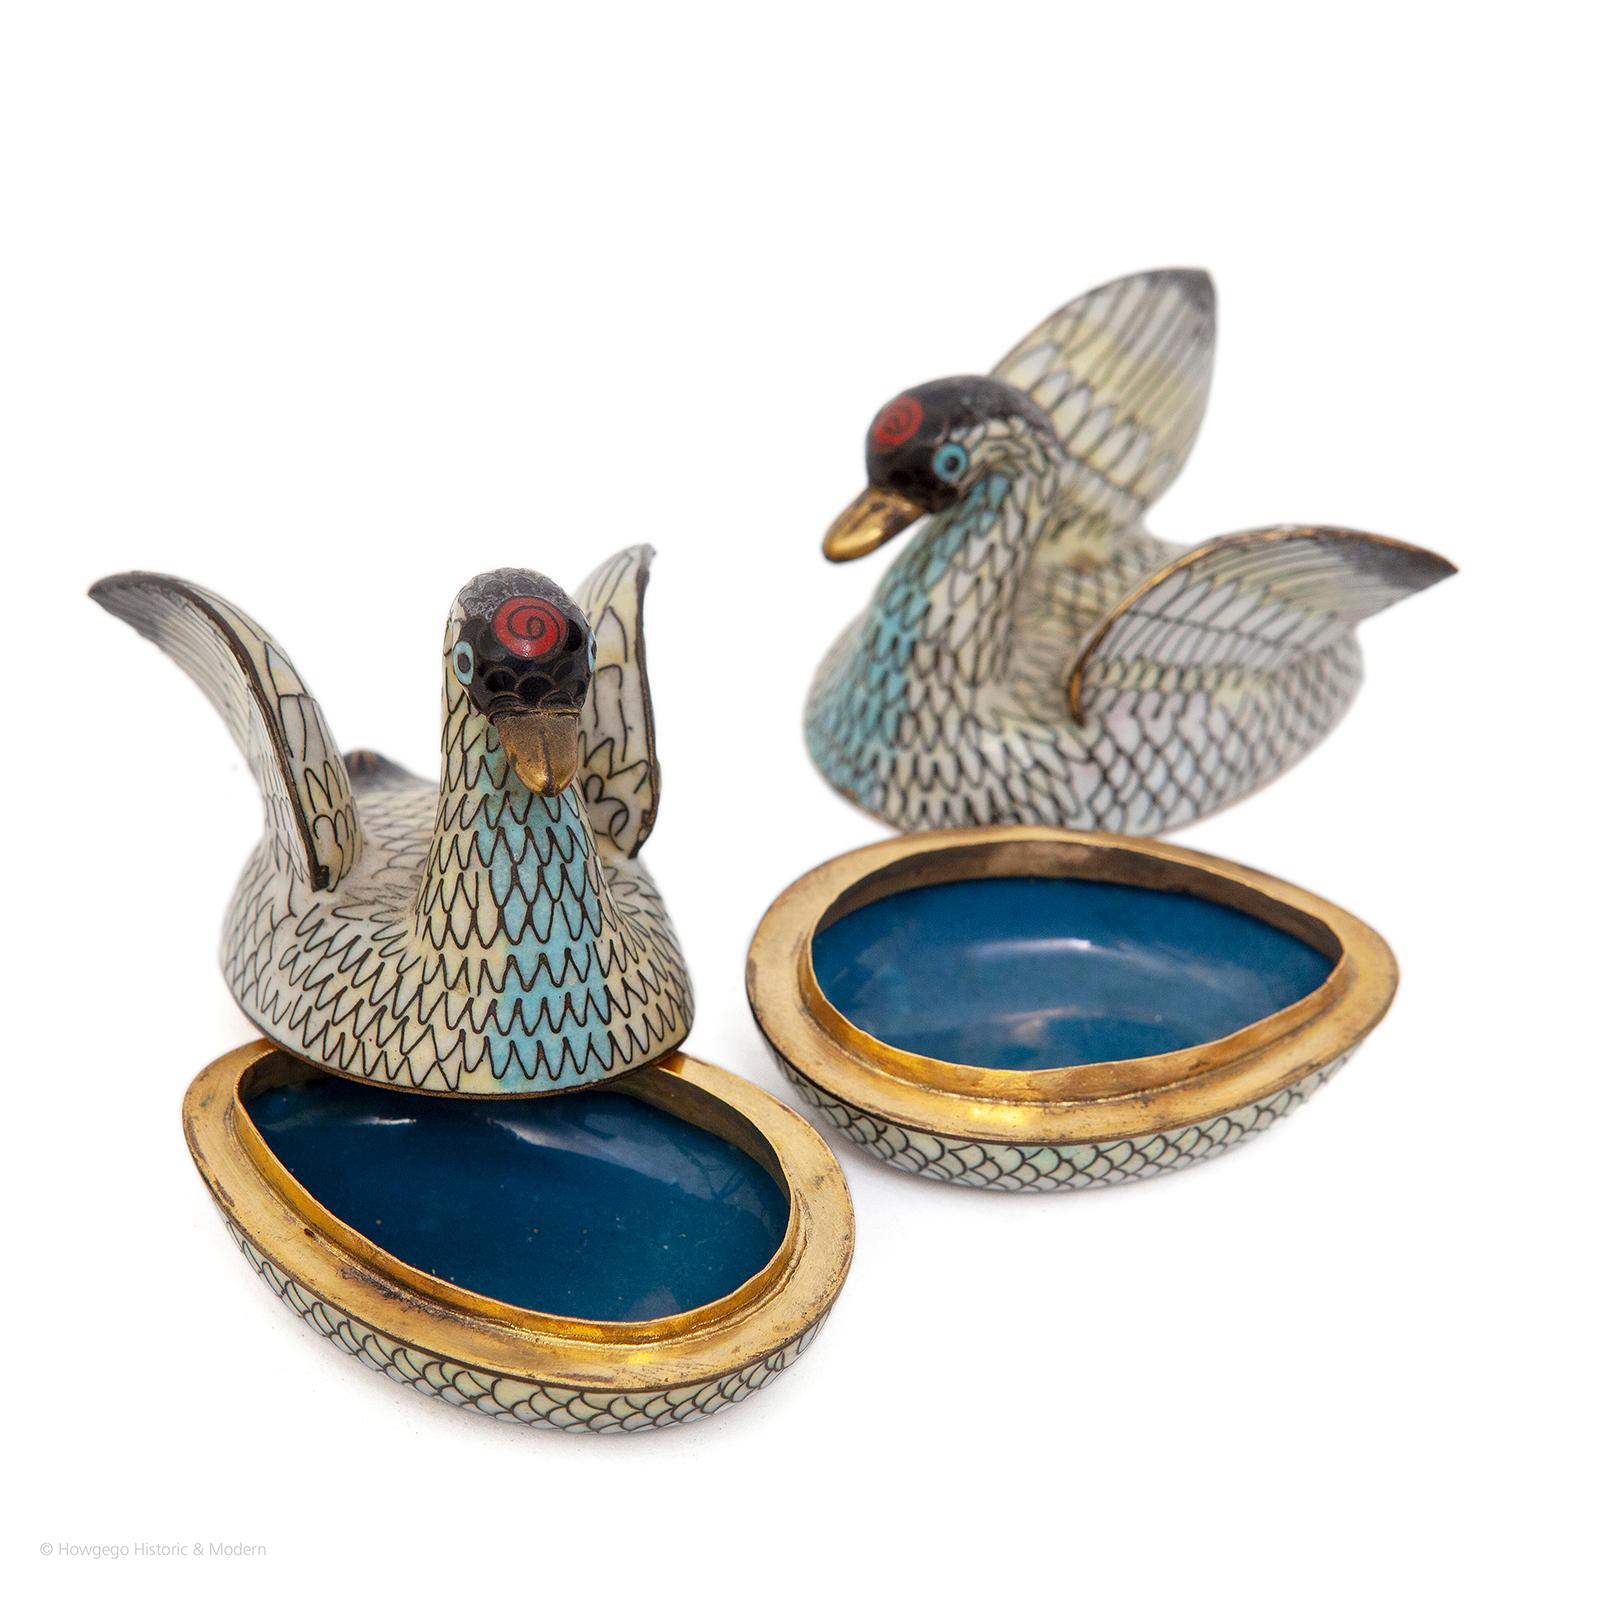 - Once courtship is complete, male and female swans bond for life and this delightful pair of Japaneer cloisonné swans symbolize love and constancy, representing soul mates for life. Swans also symbolize grace, beauty, trust, loyalty, inner beauty